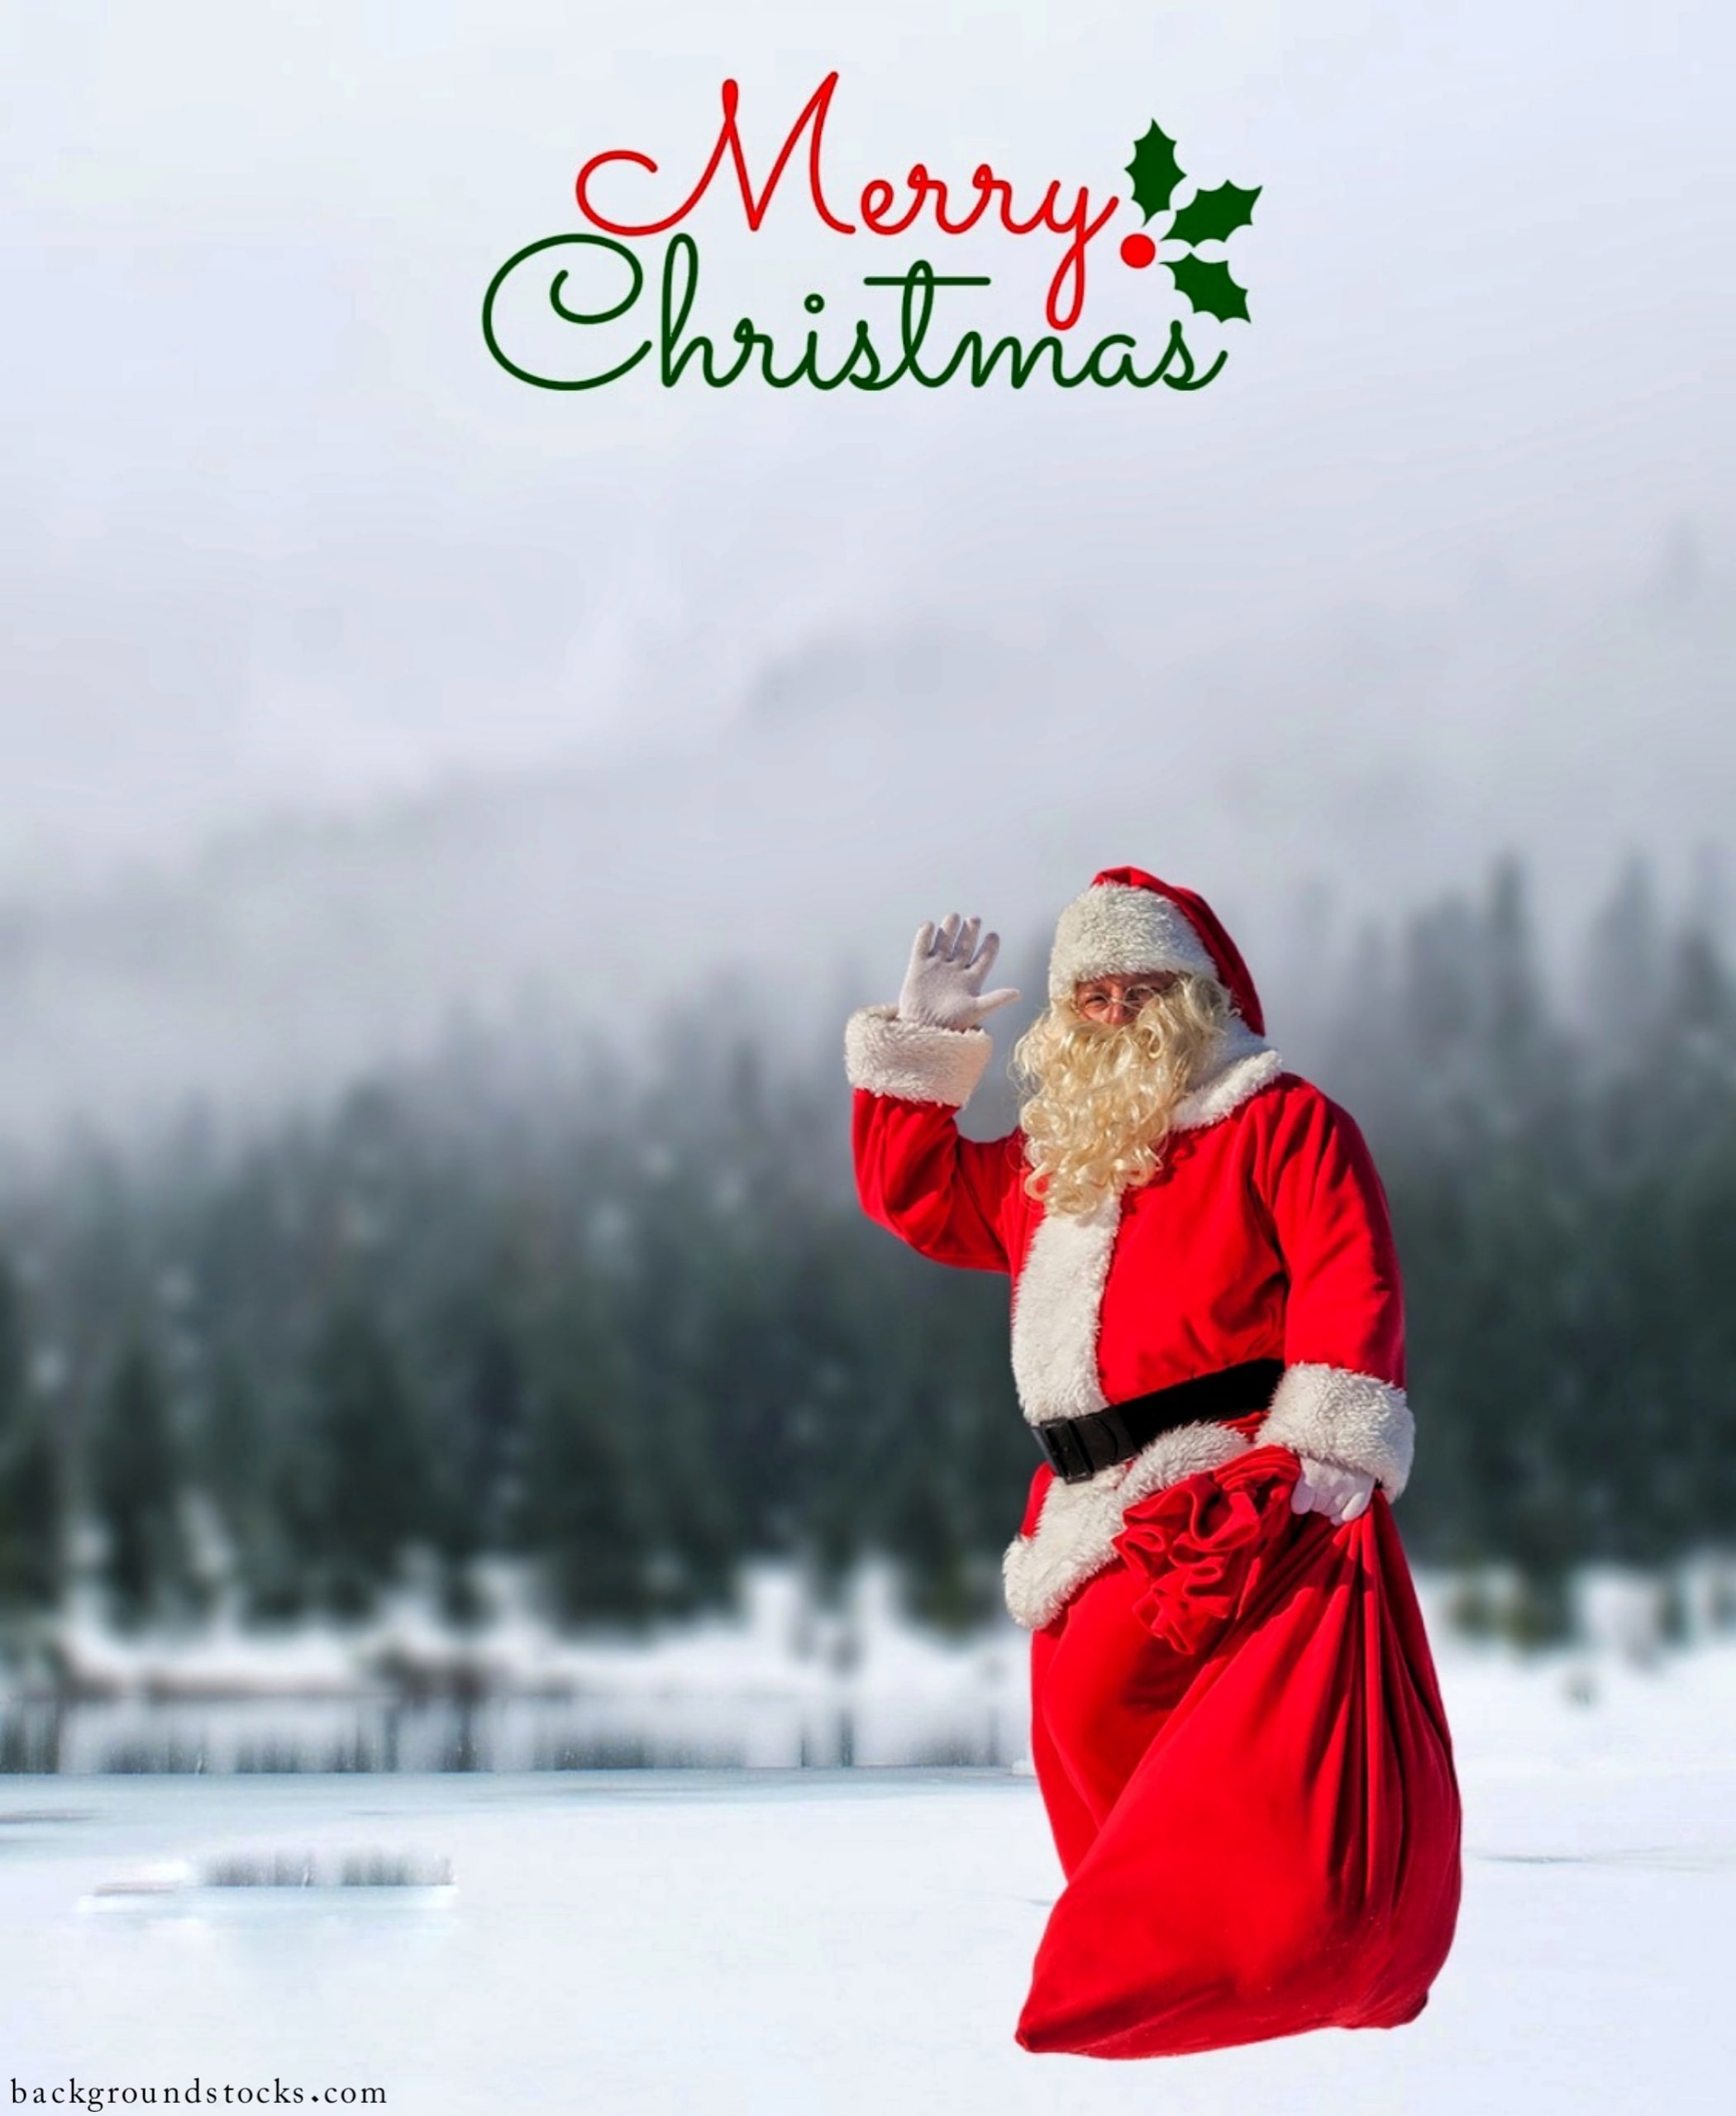 Full HD Merry Christmas Background 